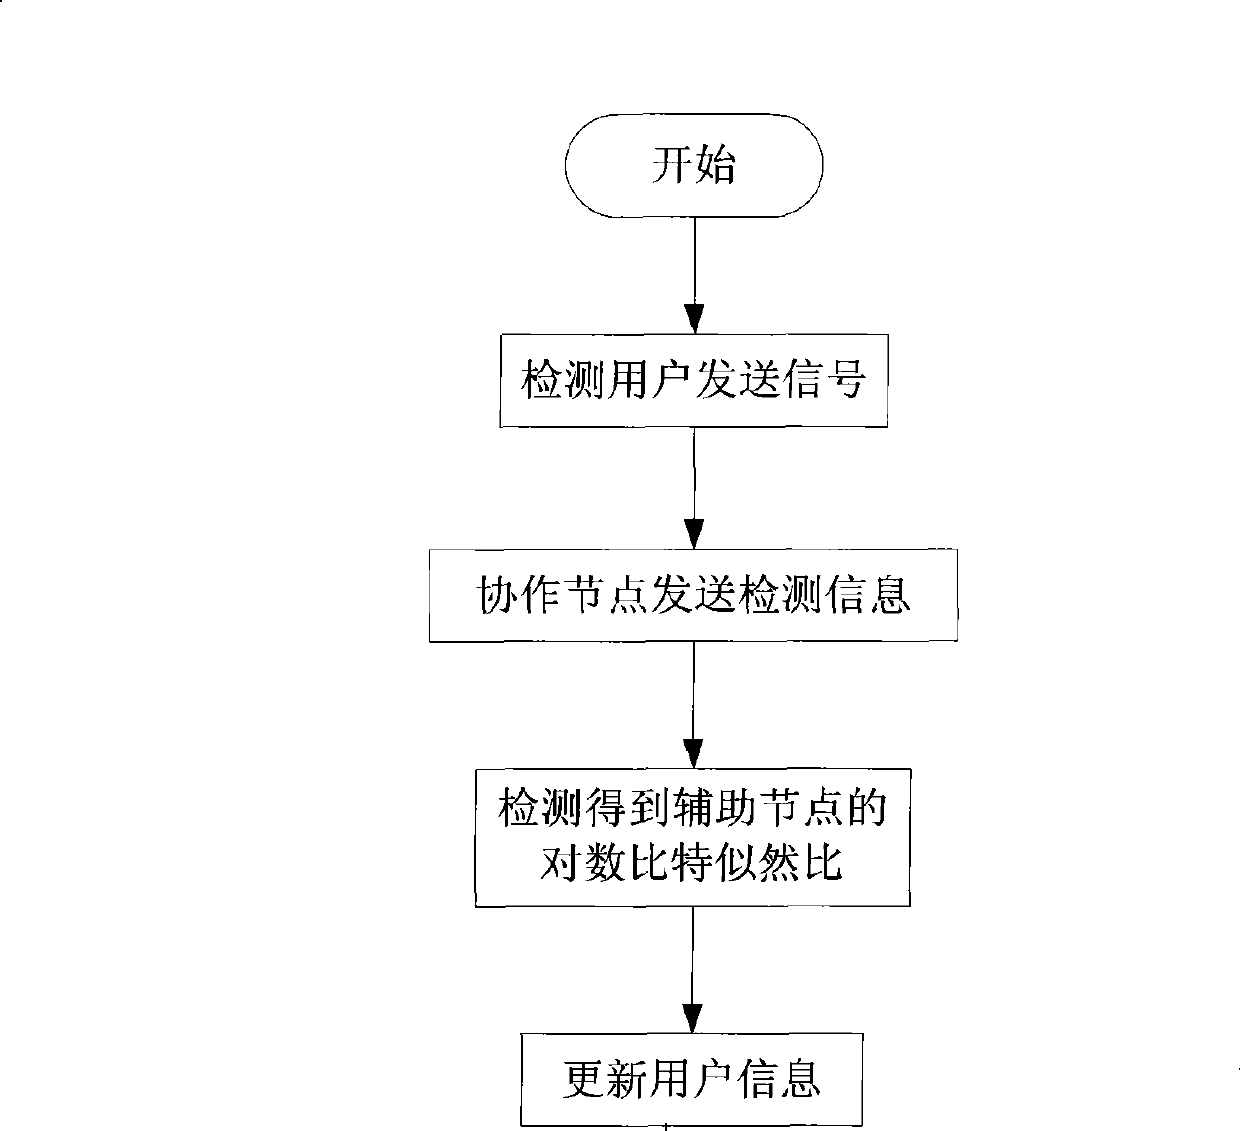 Information interactive combining method in collaboration multi-point receiving